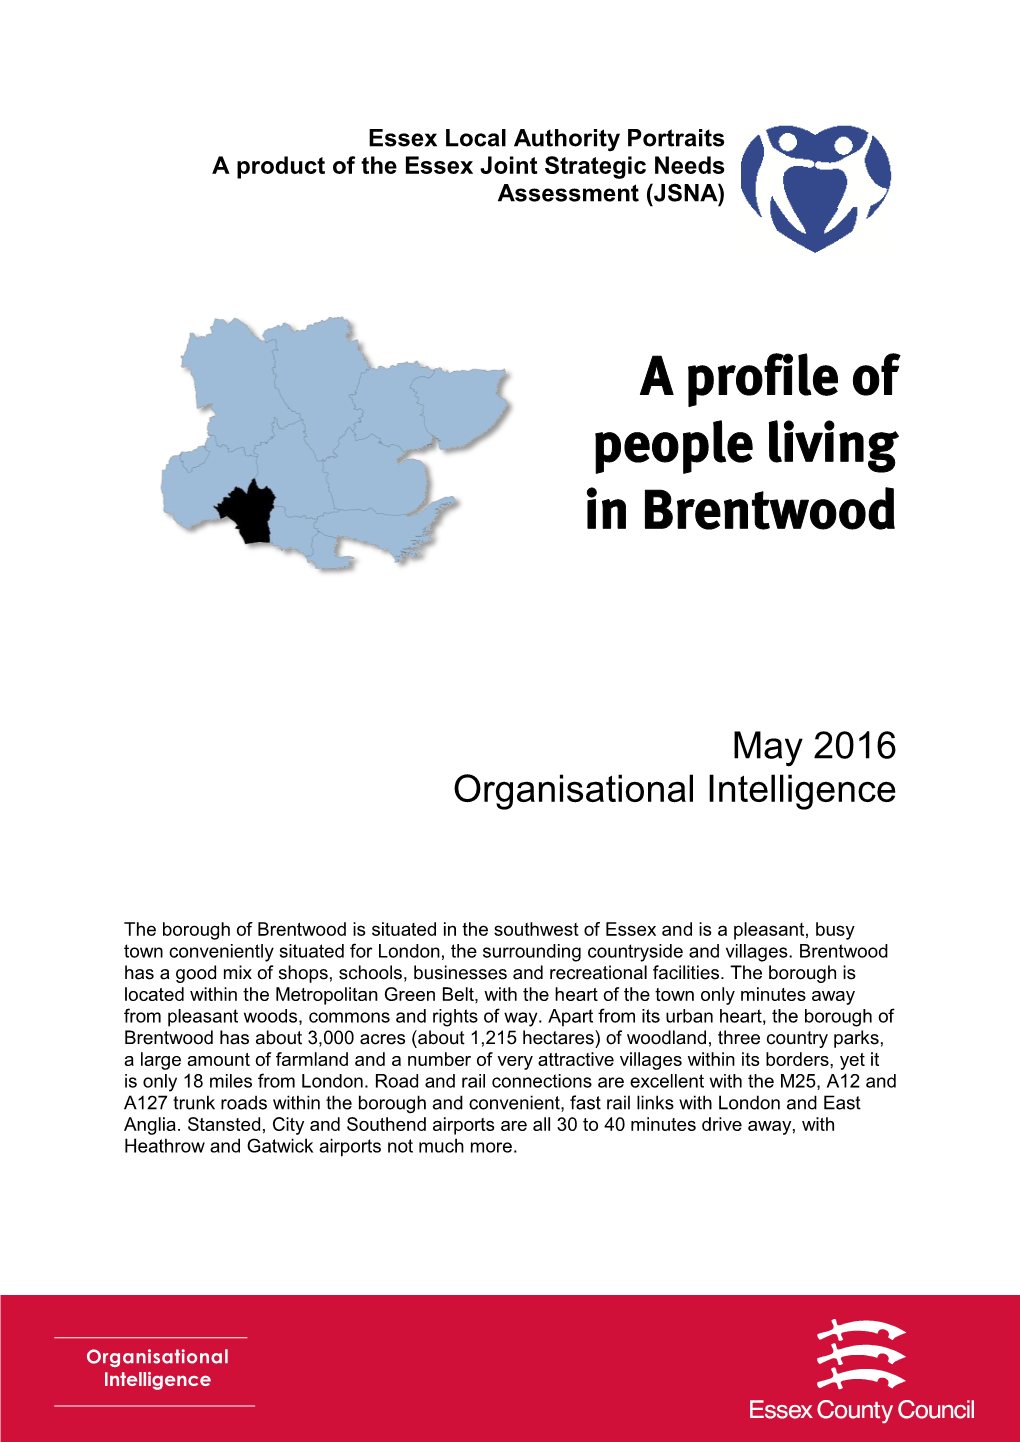 A Profile of People Living in Brentwood